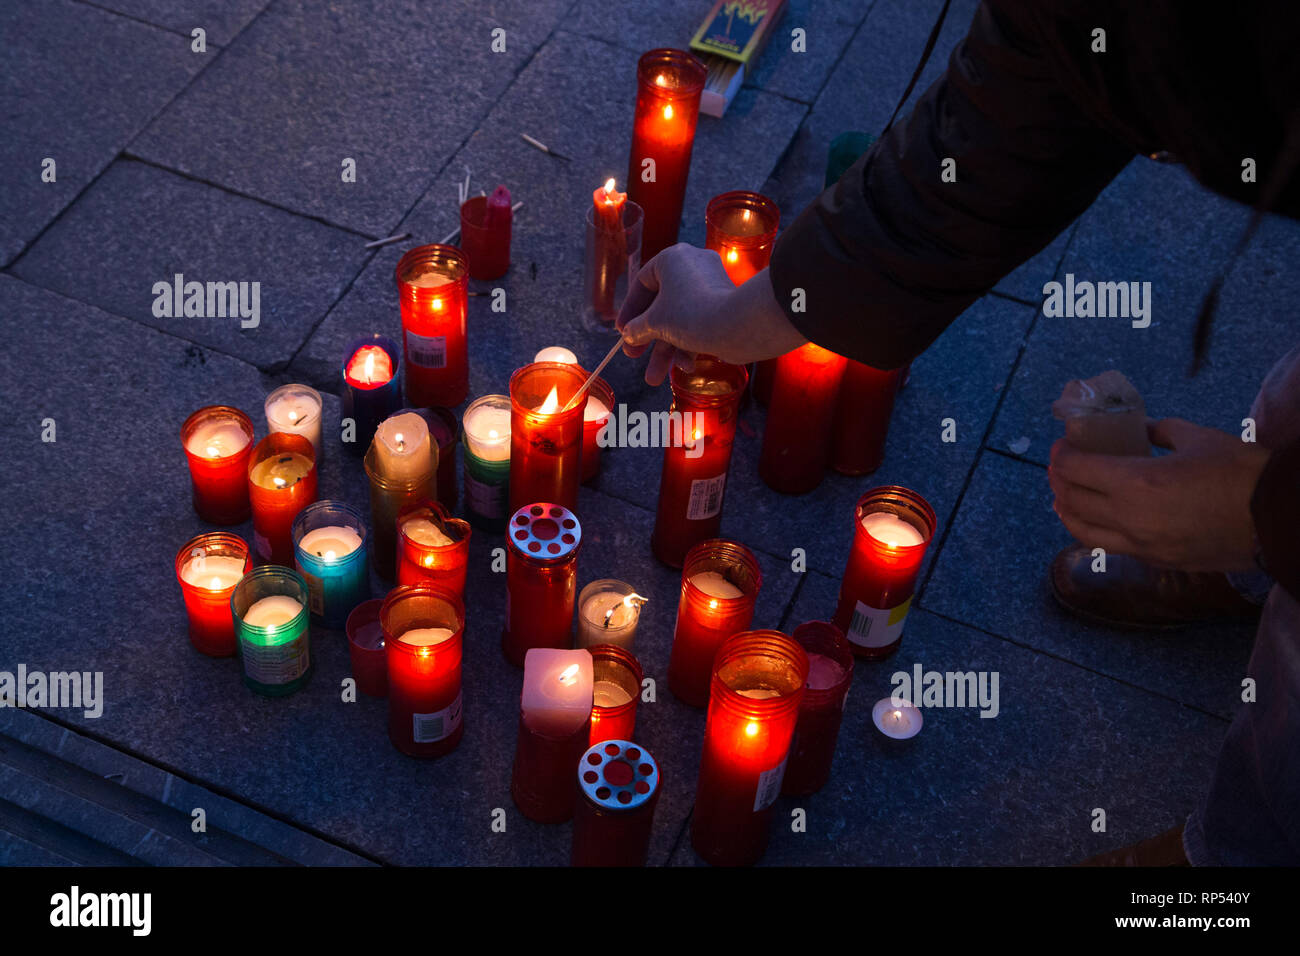 A demonstrator seen lighting candles during the protest. Protest in Puerta del Sol of Madrid against the energetic poverty in Spanish families as a result of the economic crisis defending a model of clean energy and under social control. It is estimated that 6.8 million people suffer from energy poverty in Spain. Stock Photo